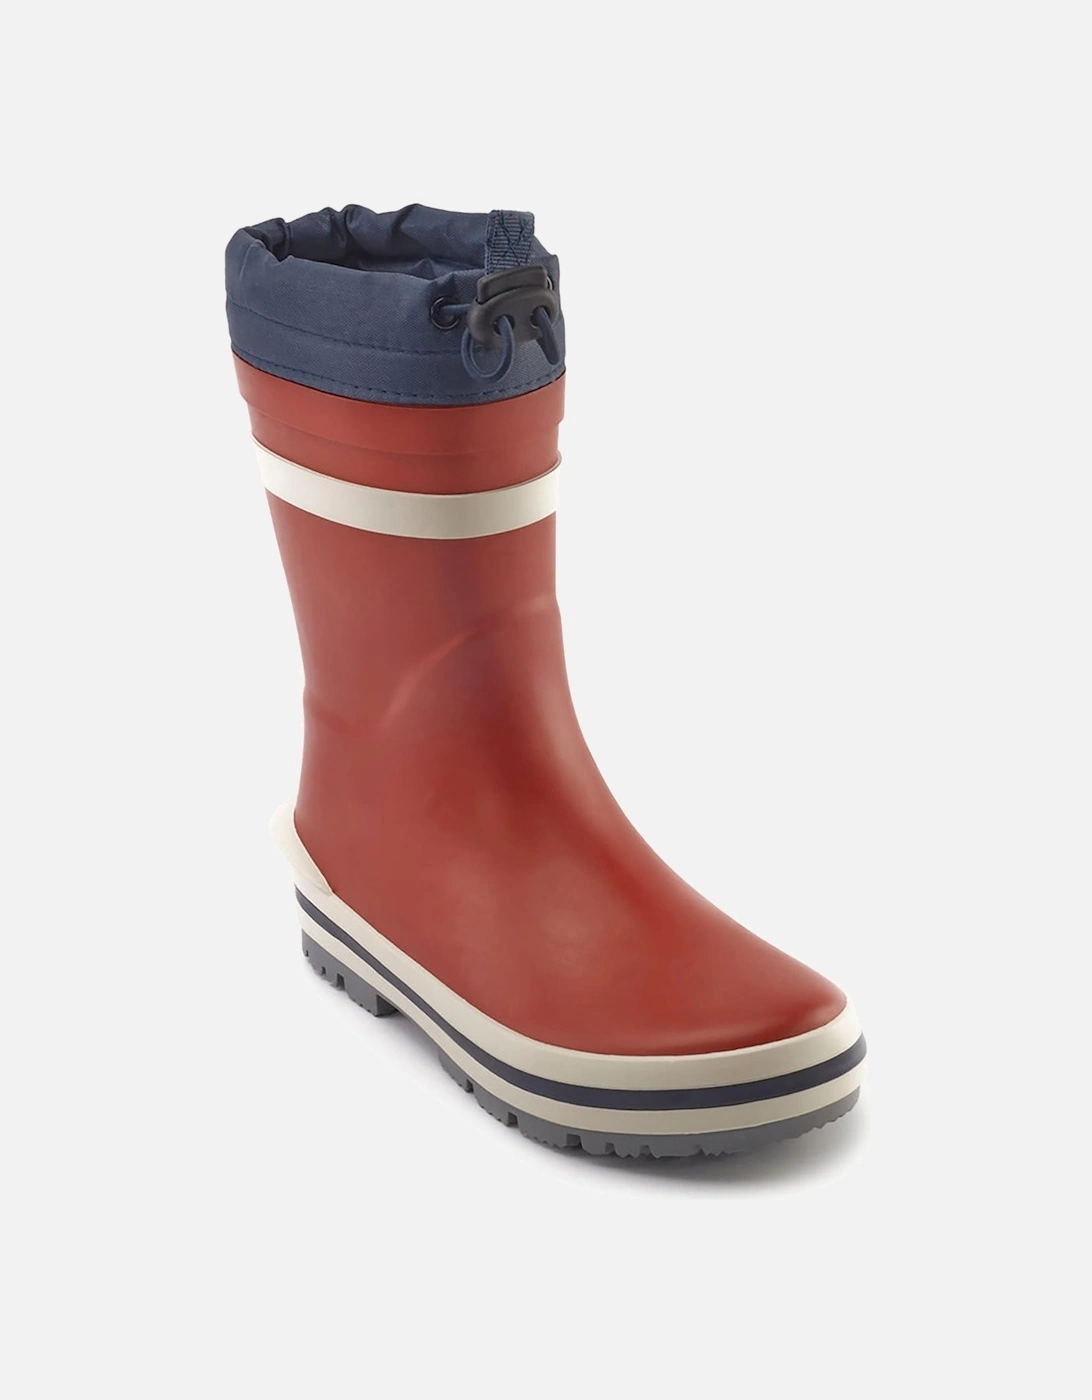 BIG PUDDLE CHILDREN'S WELLY BOOTS